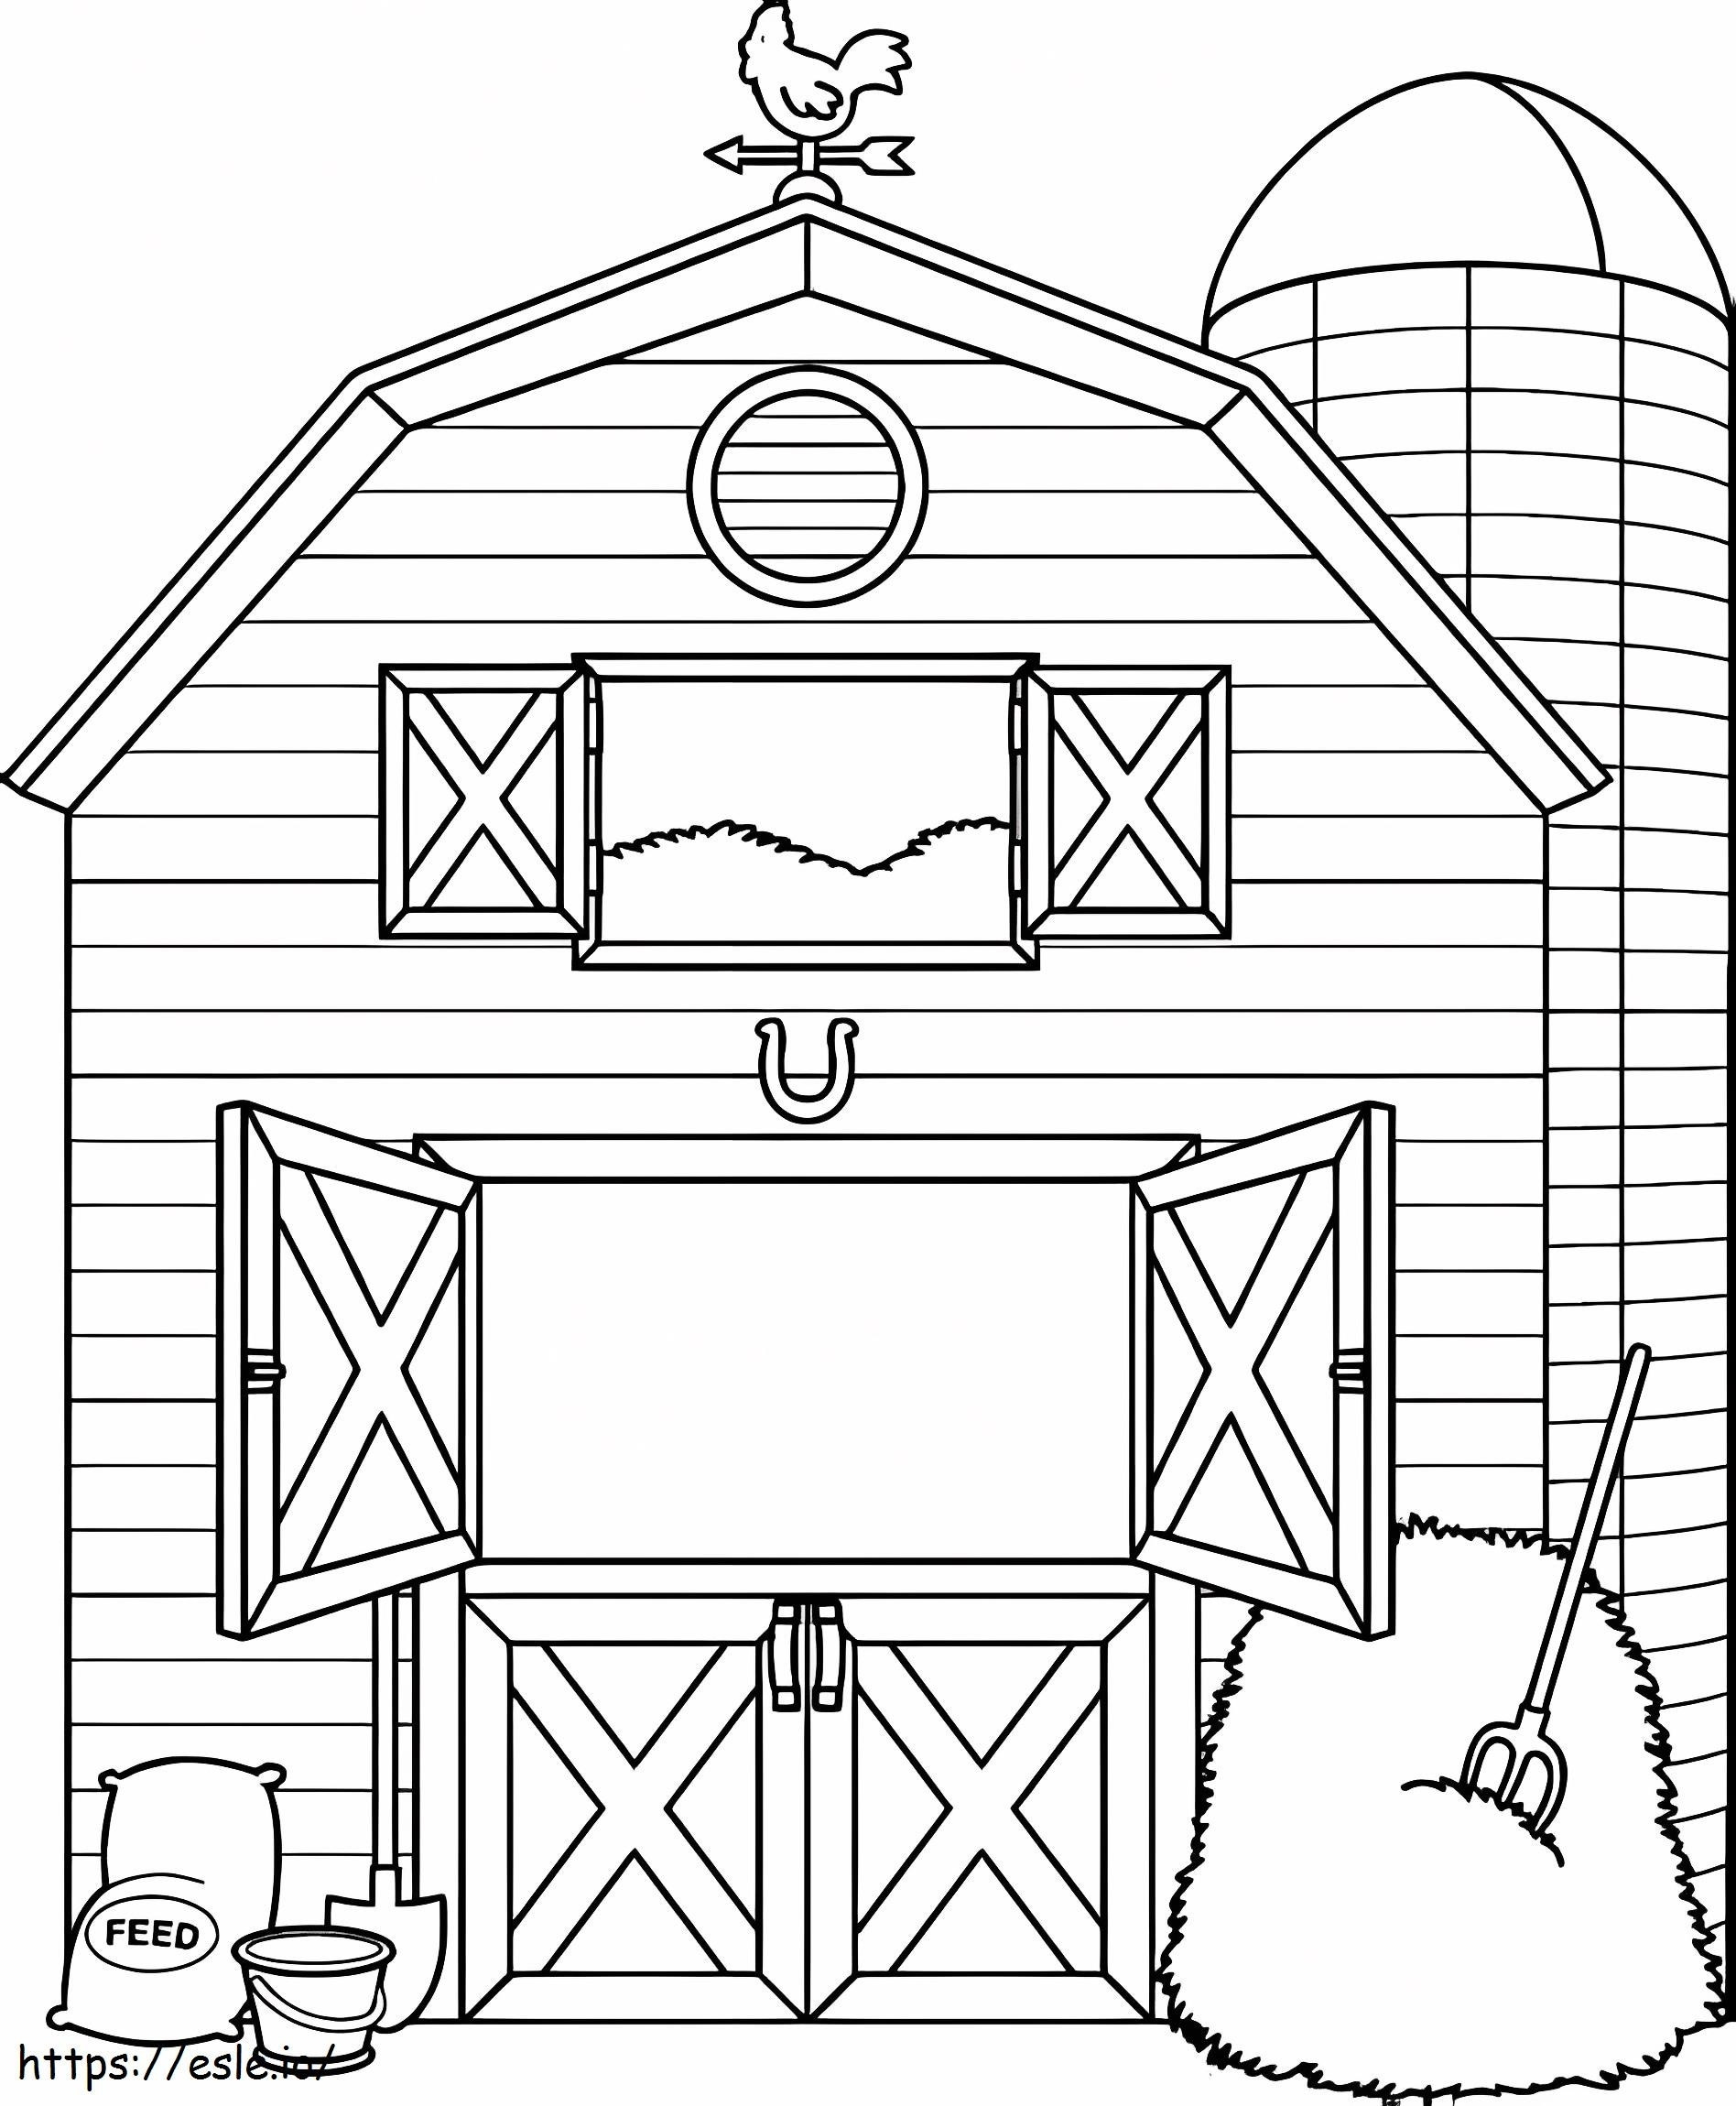 Perfect Barn coloring page